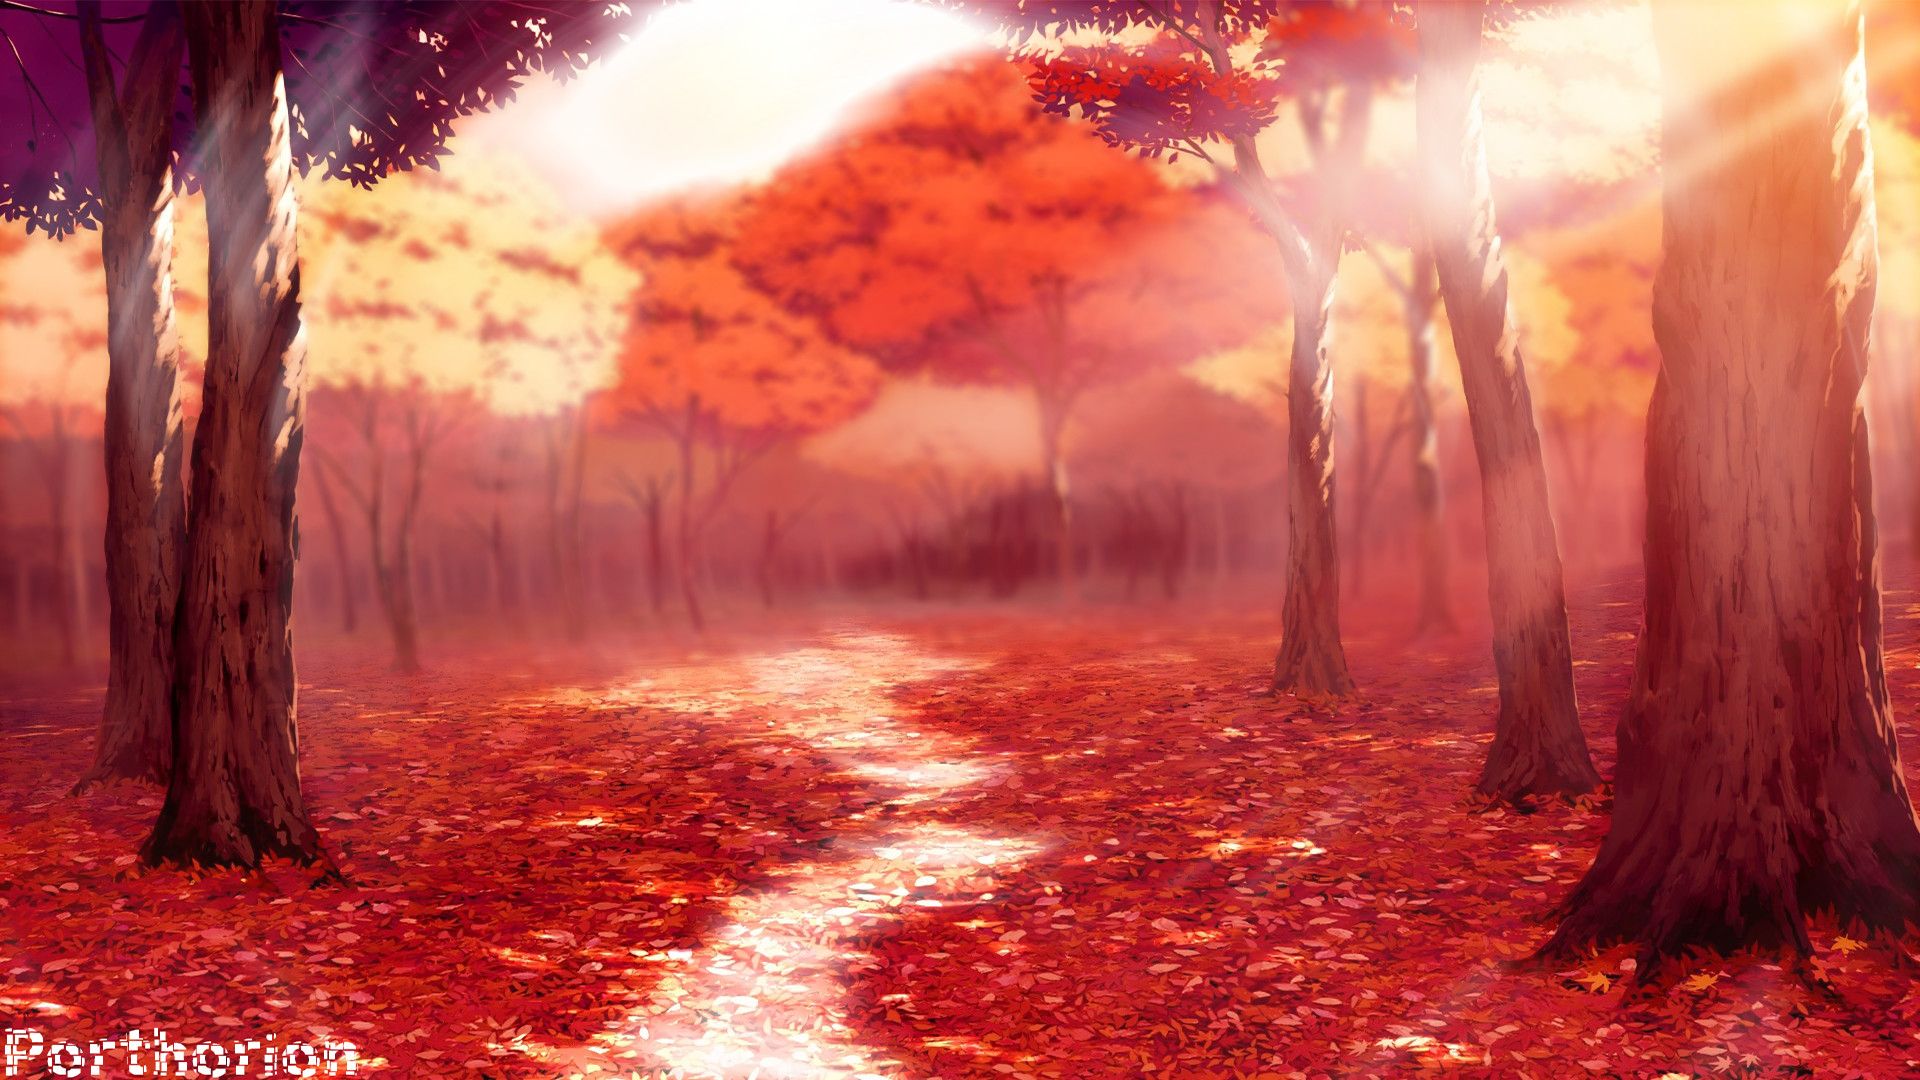 Anime Scenery Autumn Wallpapers - Wallpaper Cave